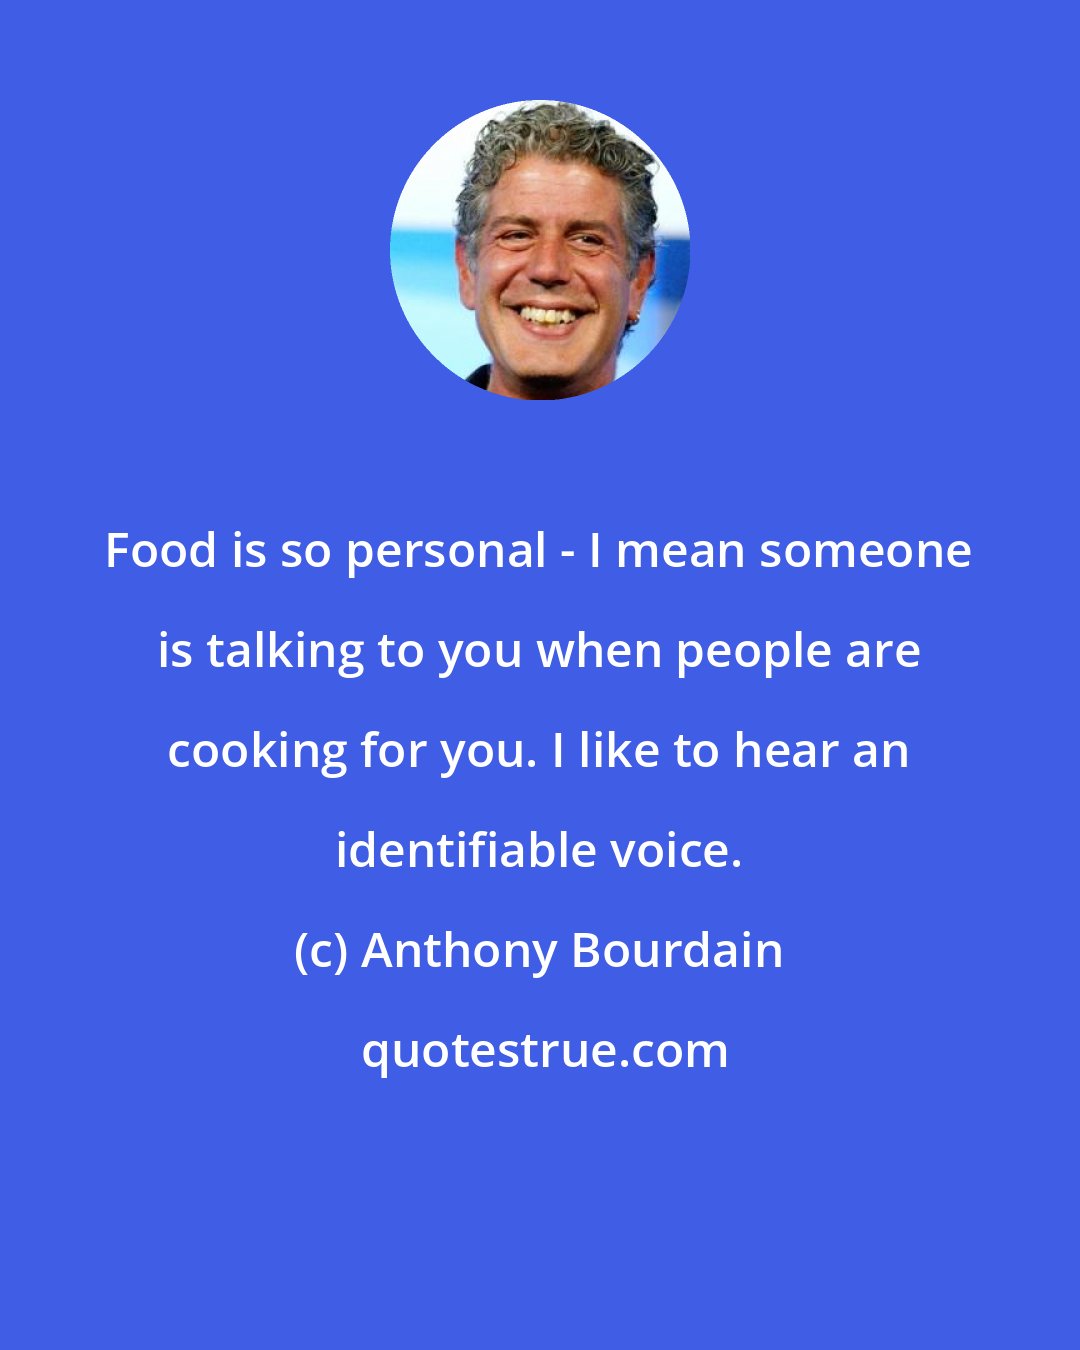 Anthony Bourdain: Food is so personal - I mean someone is talking to you when people are cooking for you. I like to hear an identifiable voice.